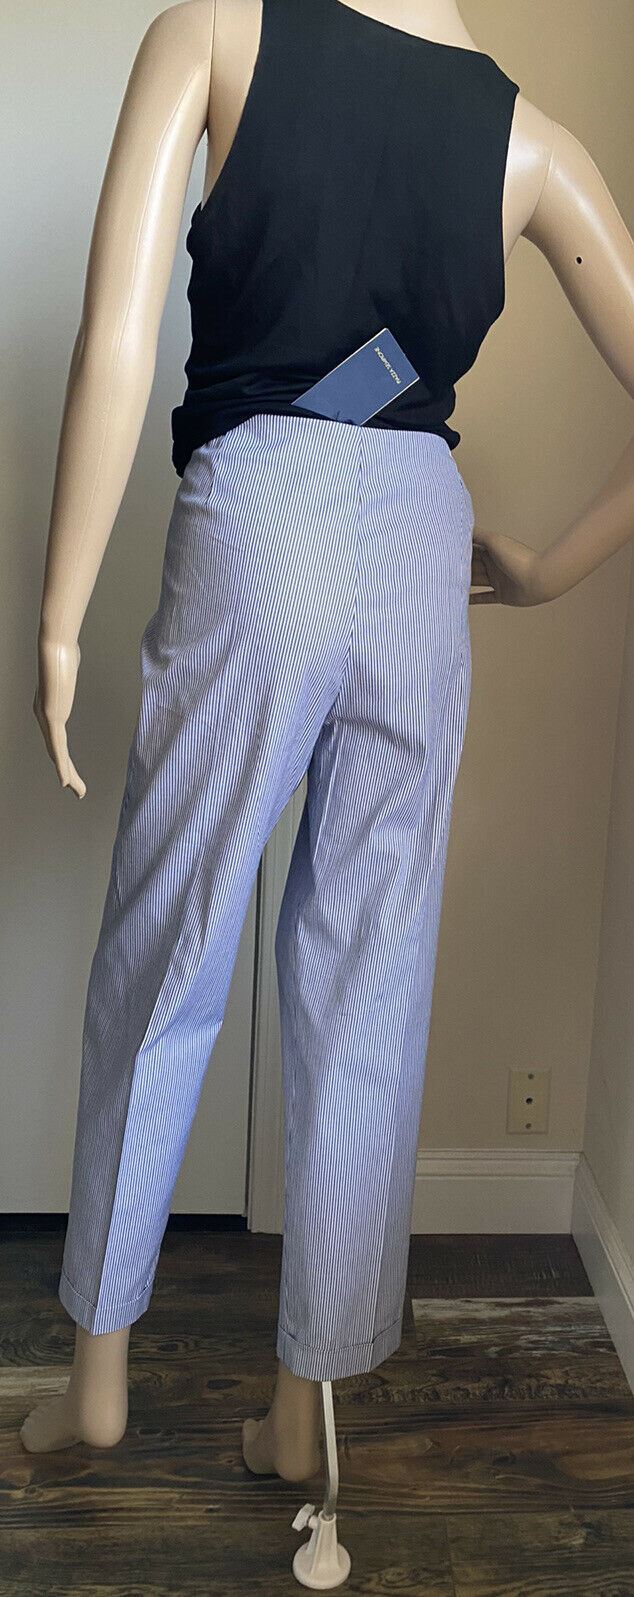 New Piazza Sempione Women Pants Blue Size 18 US Italy